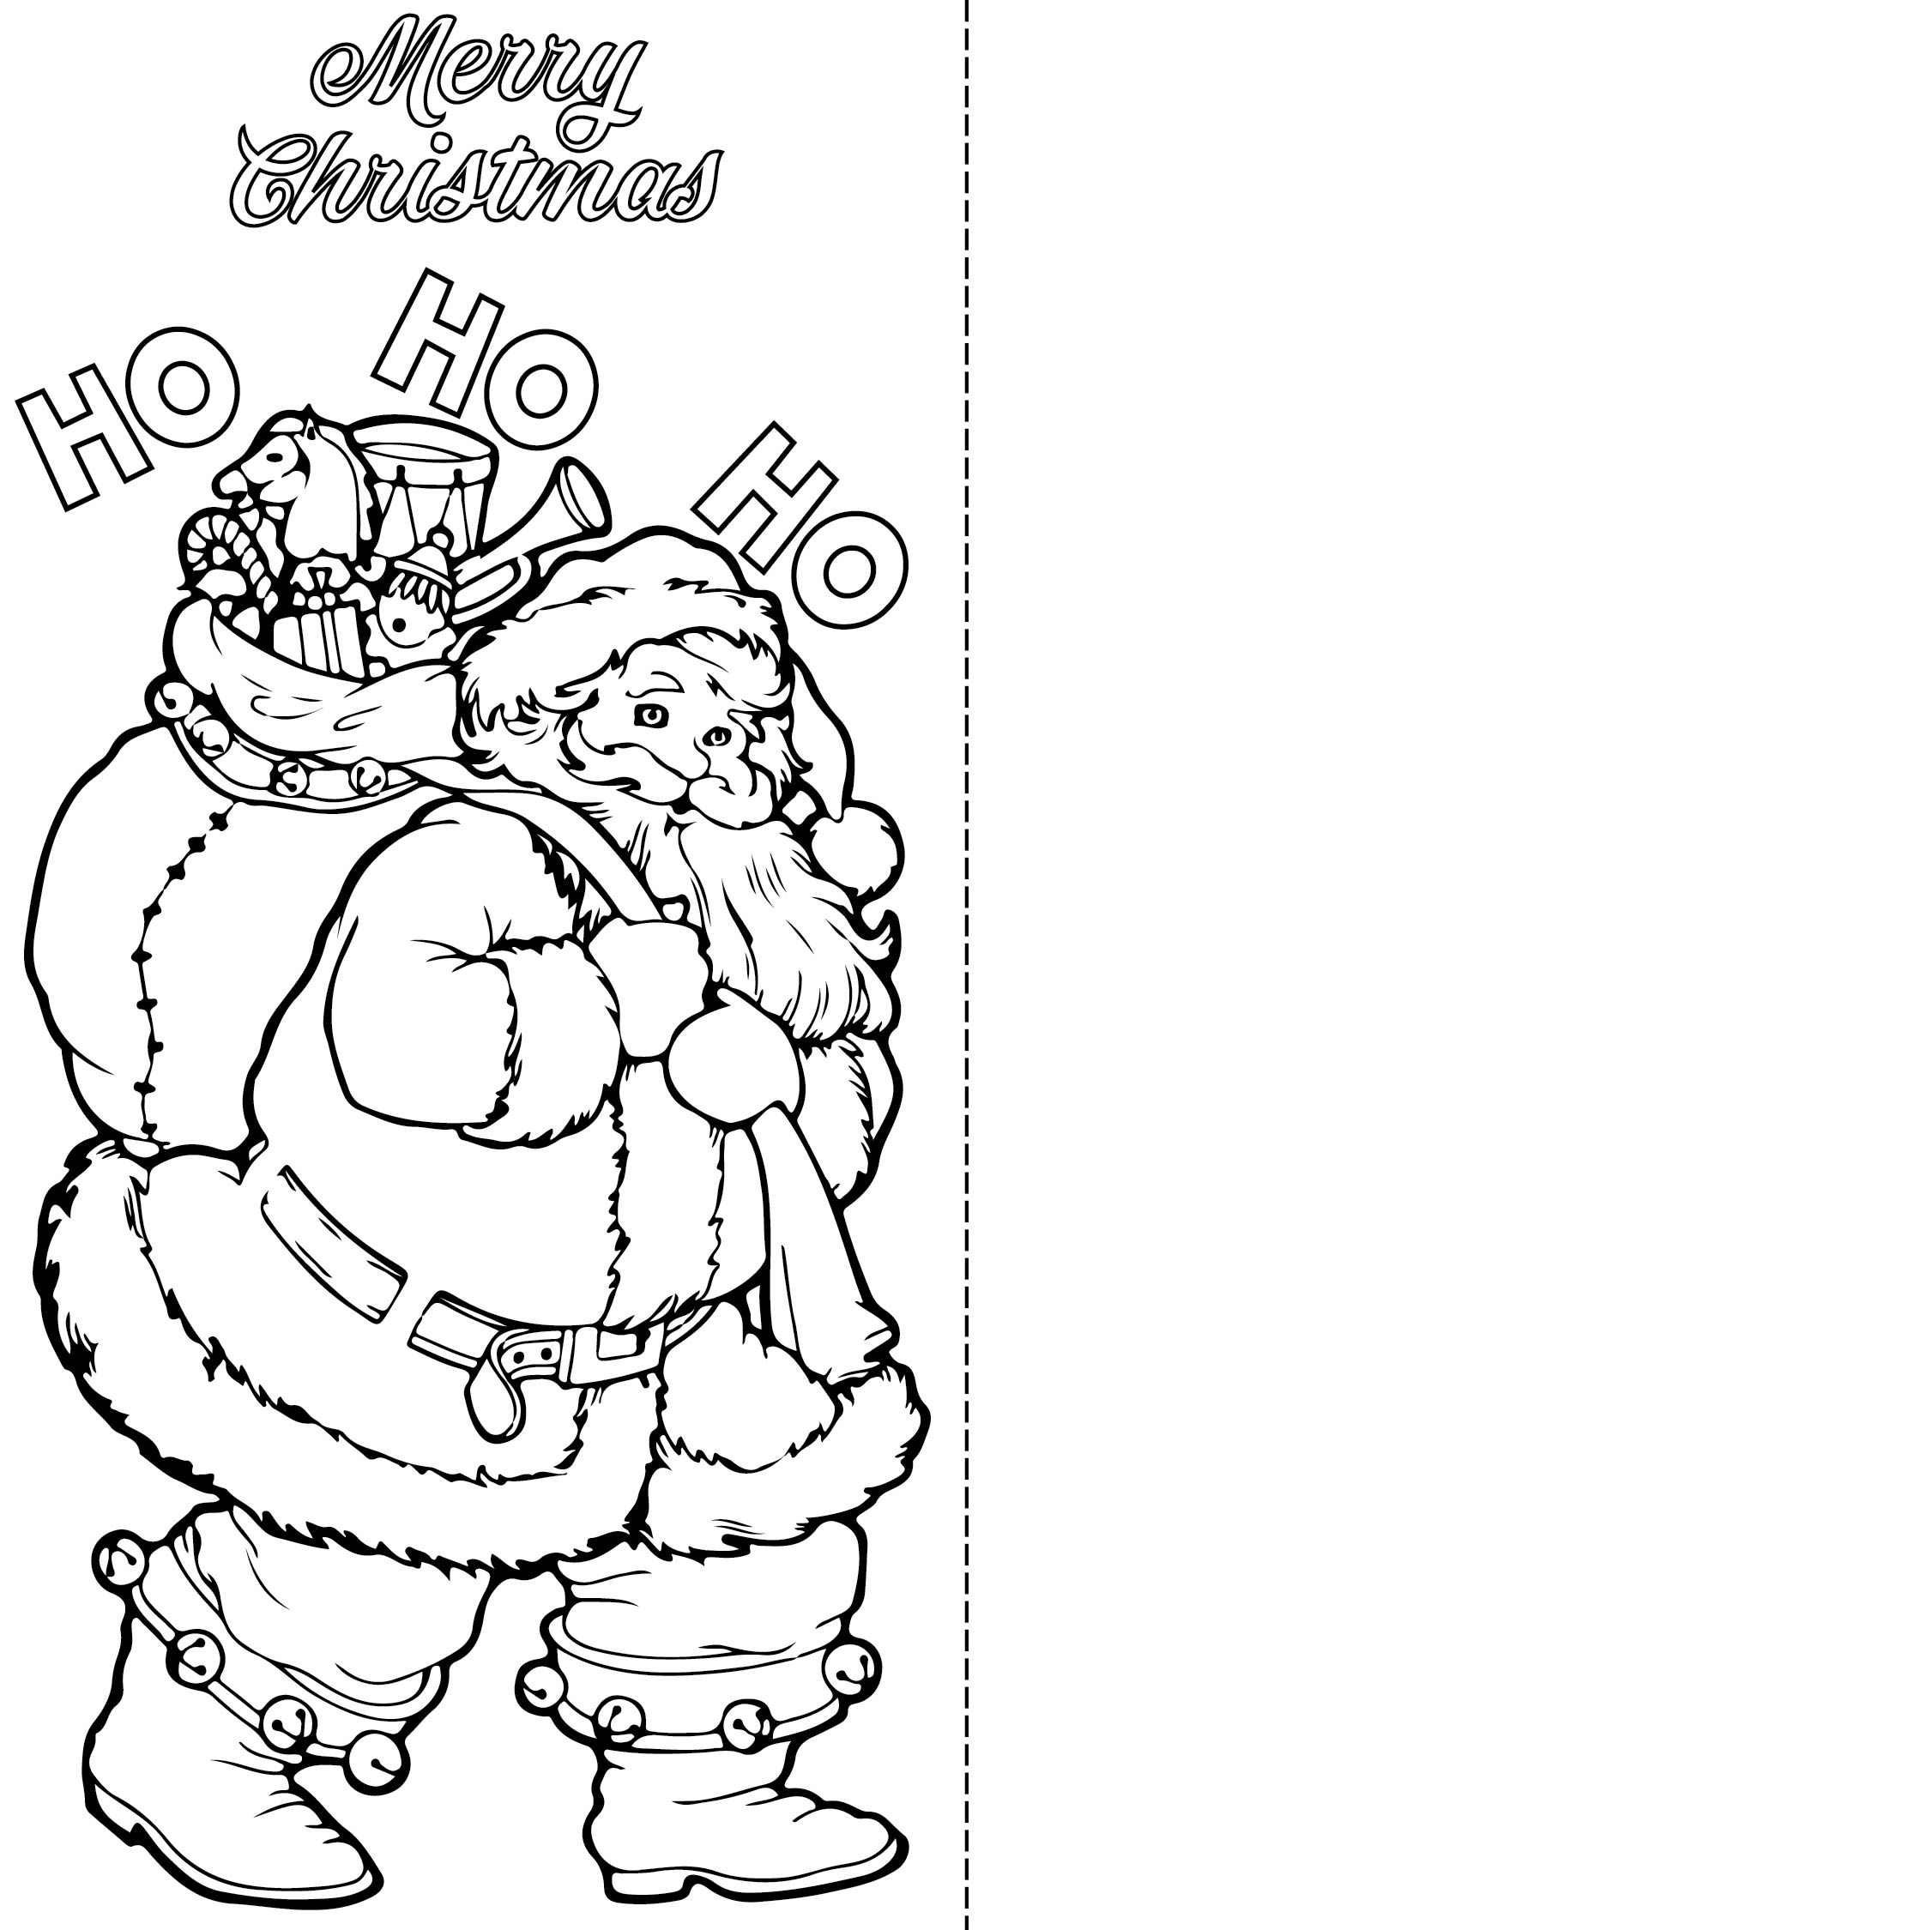 children-s-free-christmas-card-print-outs-for-card-making